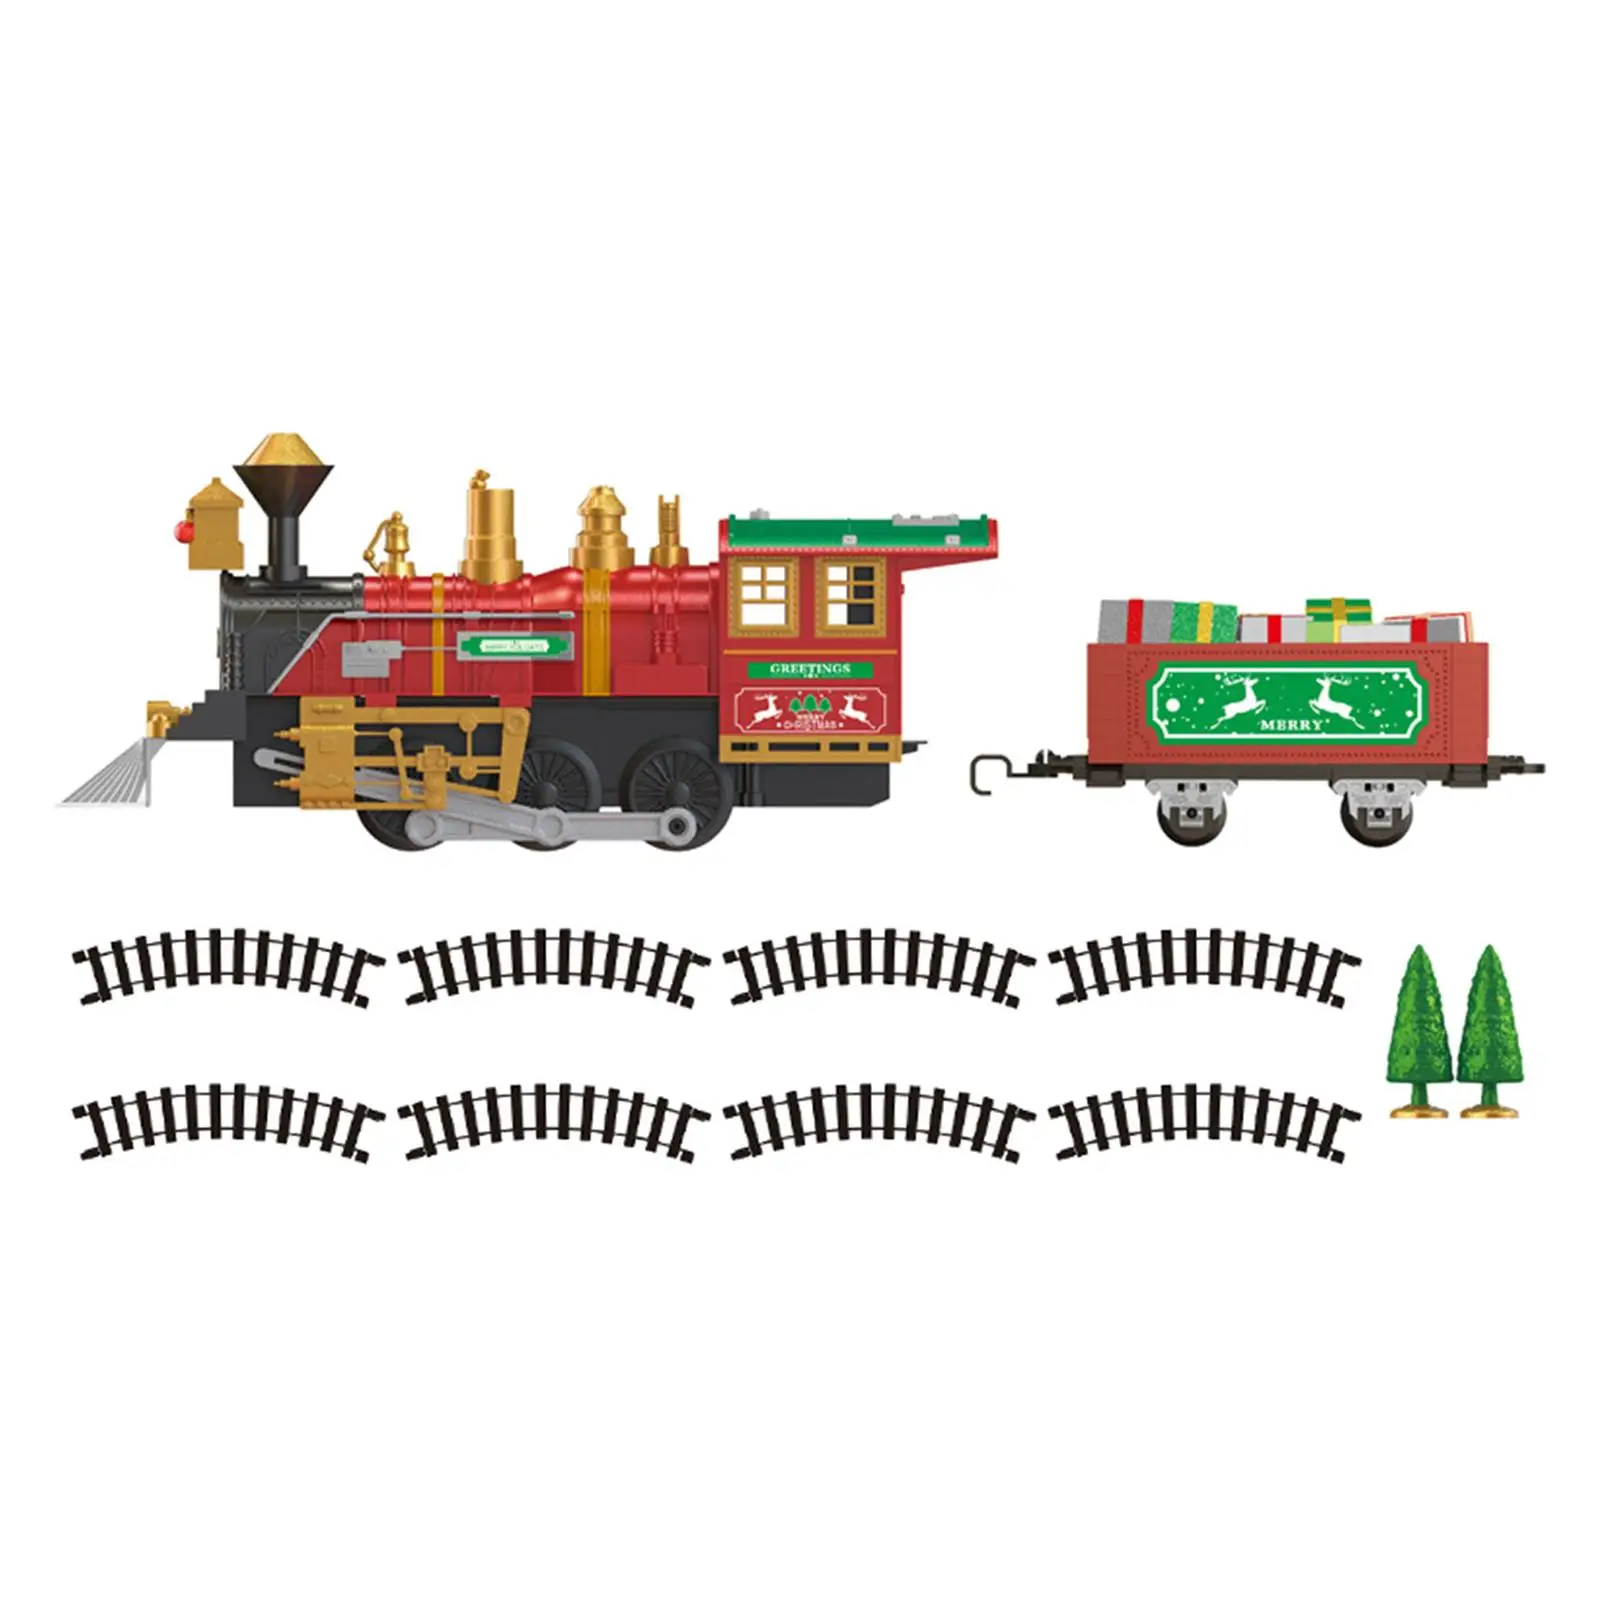 8 Tracks Christmas Train Set Railway Train Set Cute with Locomotive Electric Train Set for party Interaction Christmas